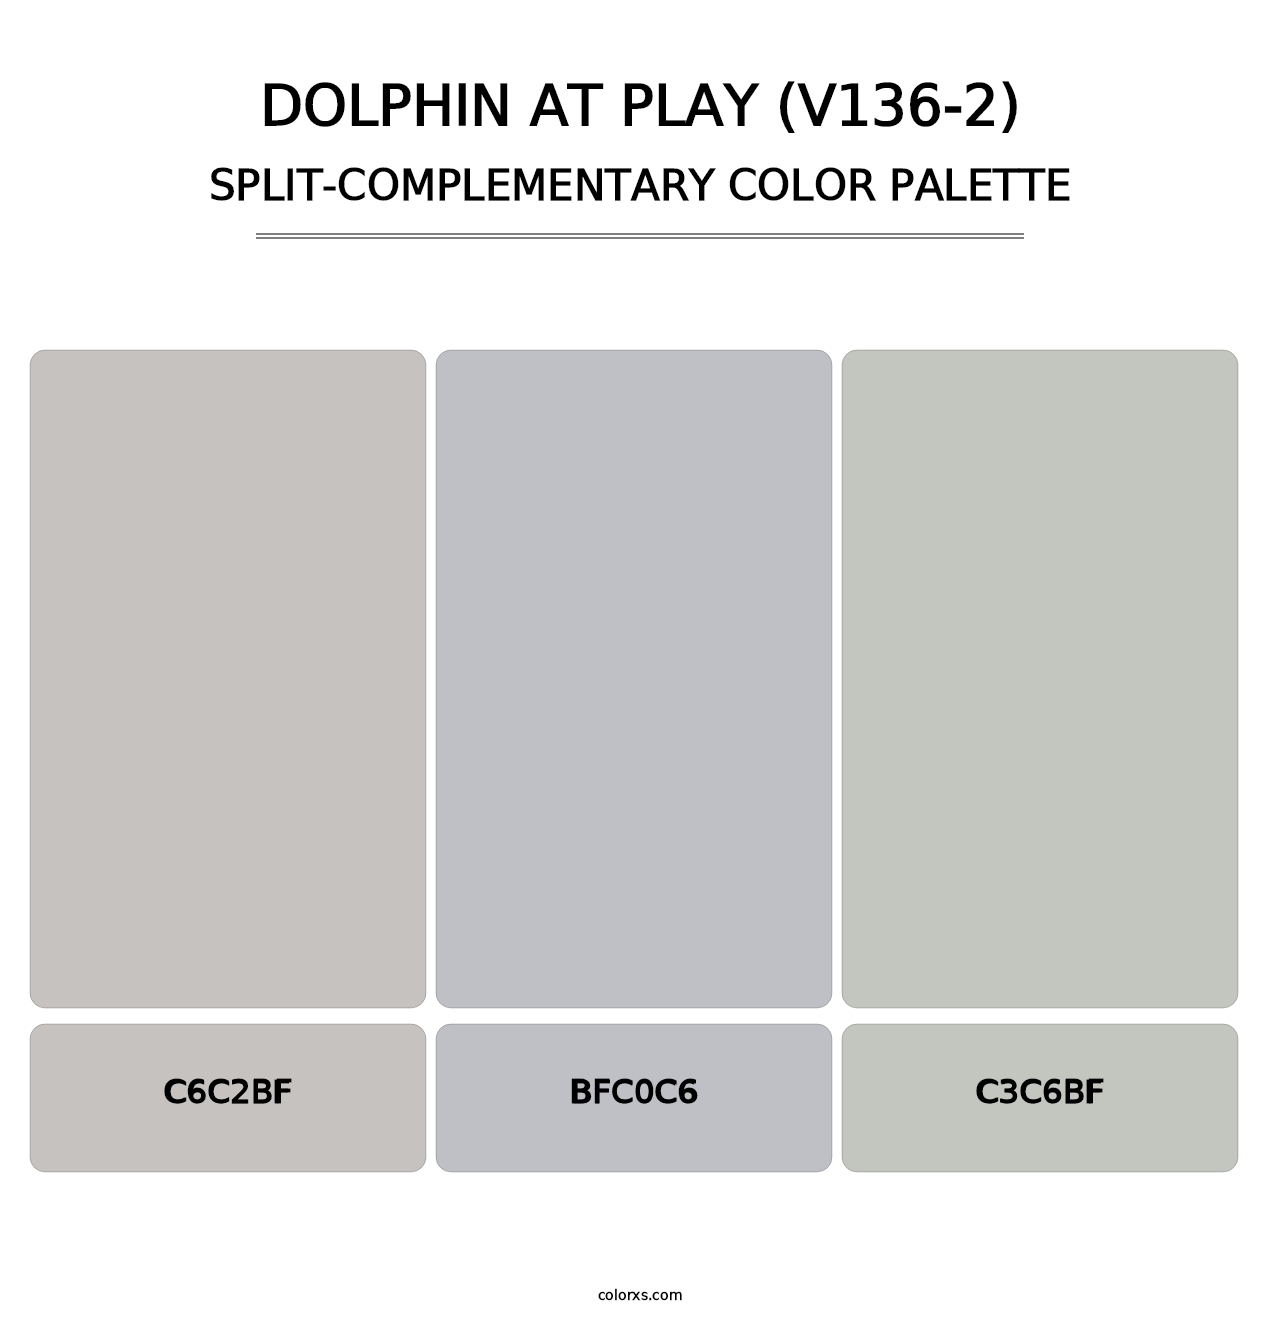 Dolphin at Play (V136-2) - Split-Complementary Color Palette